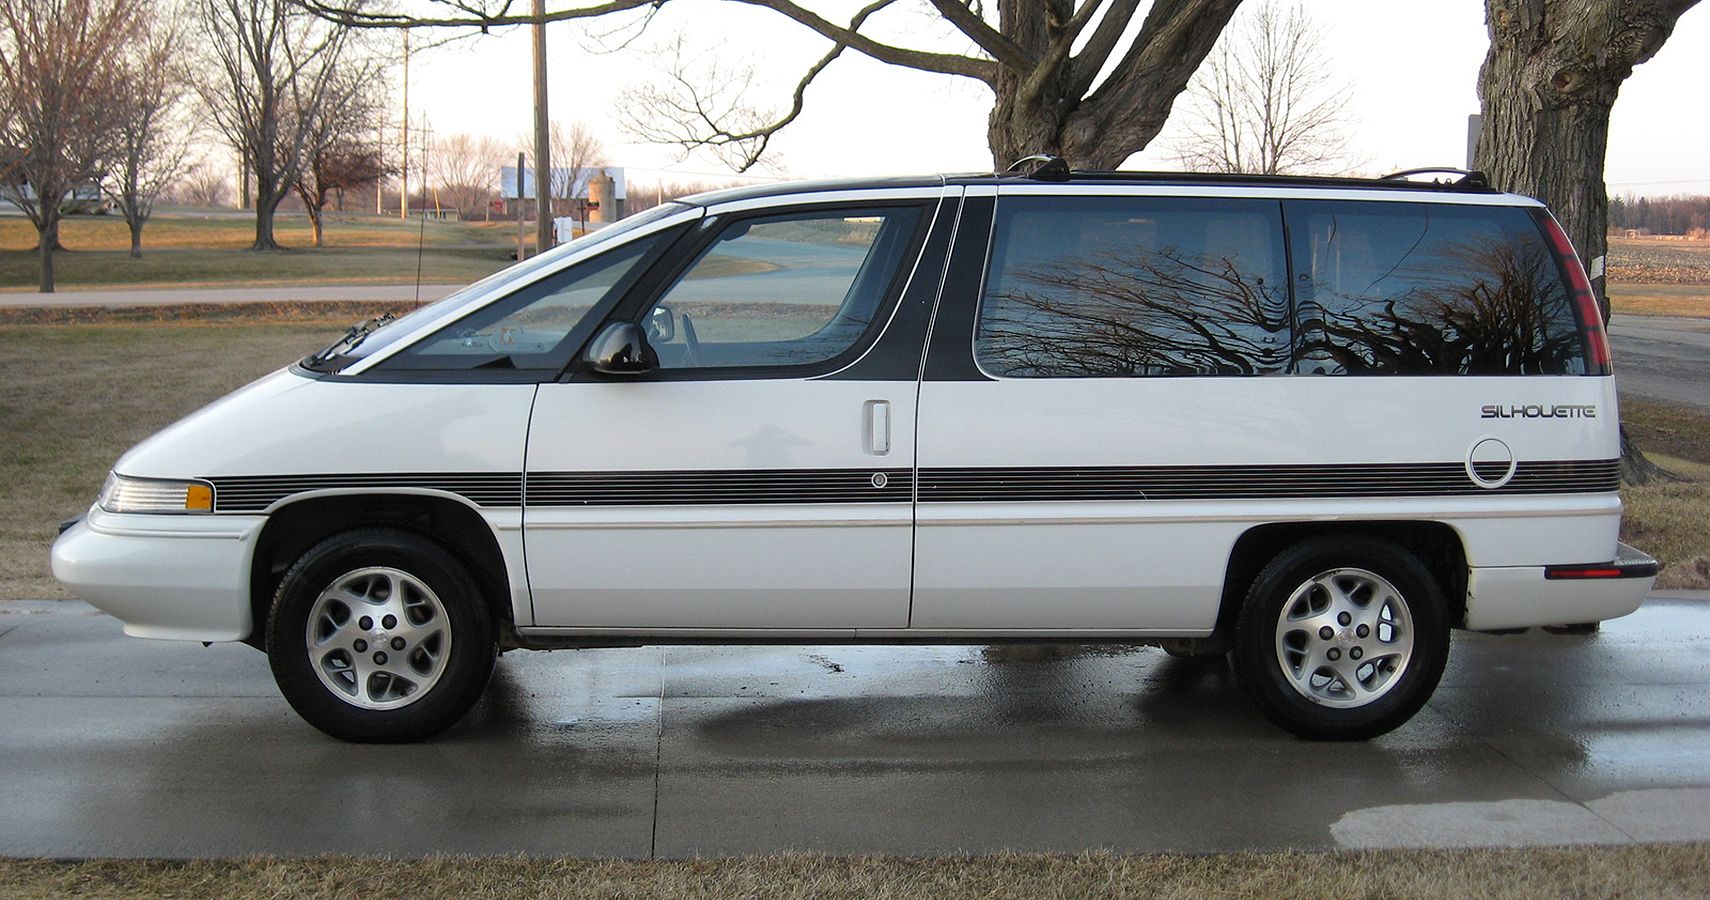 The Bad Olds: 1990 Oldsmobile Silhouette